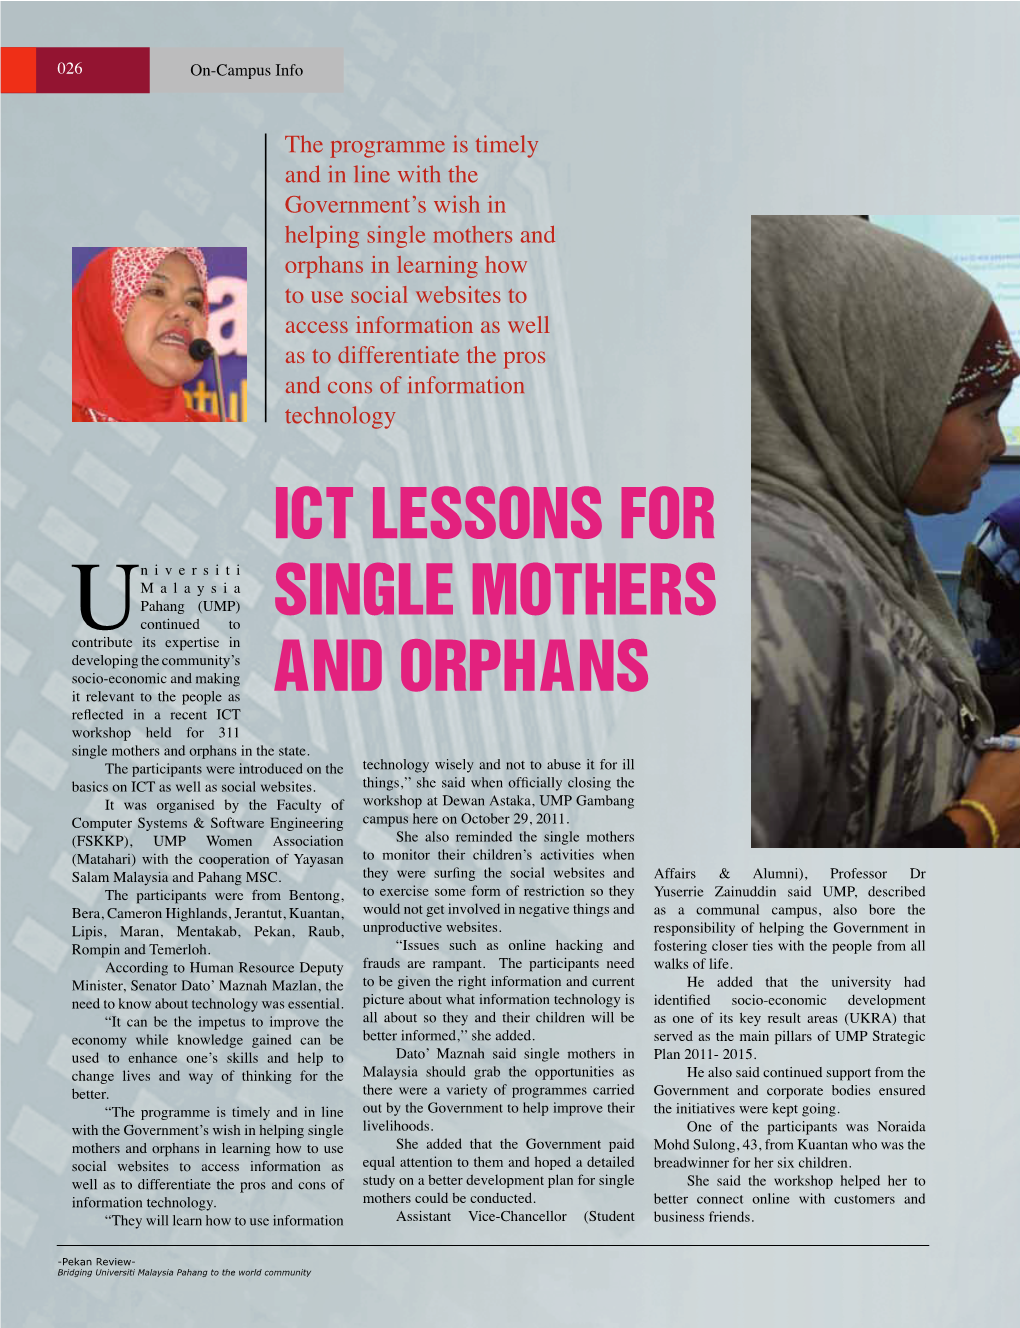 Ict Lessons for Single Mothers and Orphans